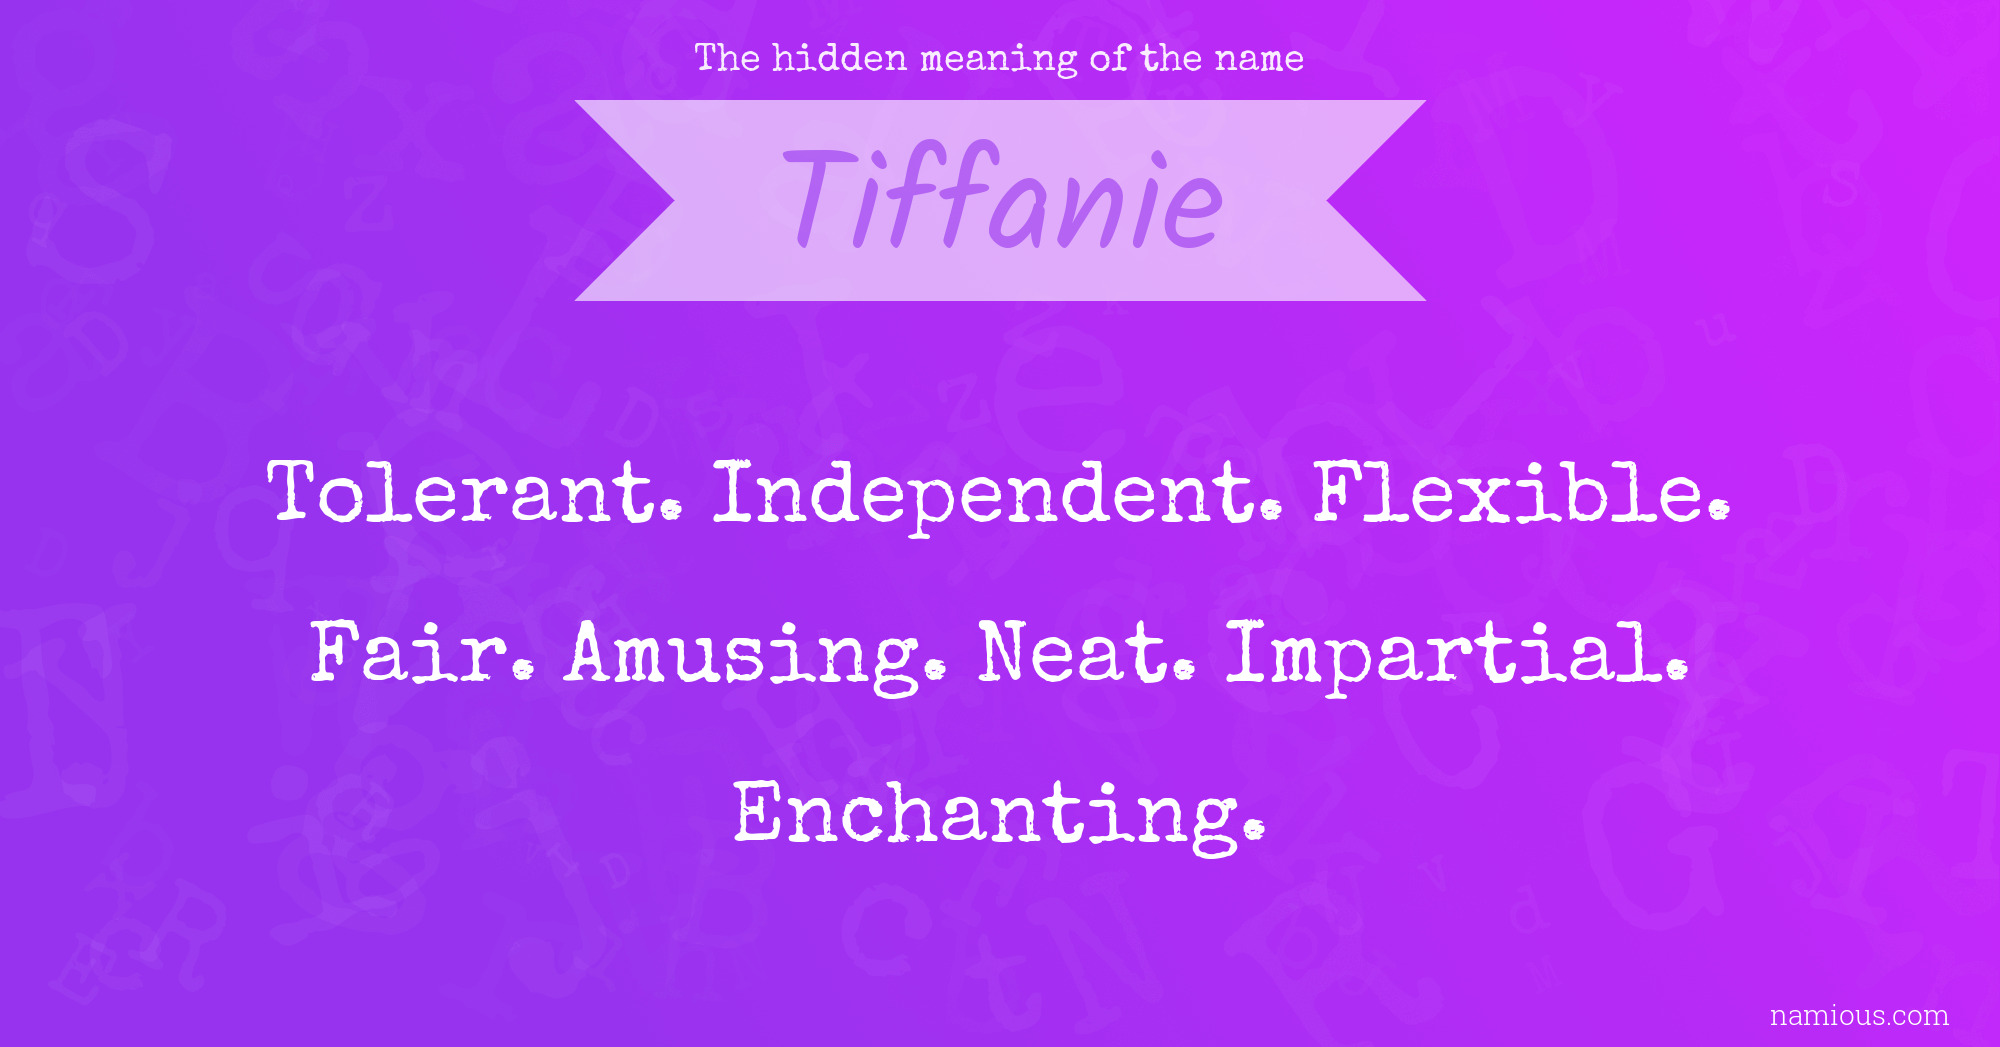 The hidden meaning of the name Tiffanie